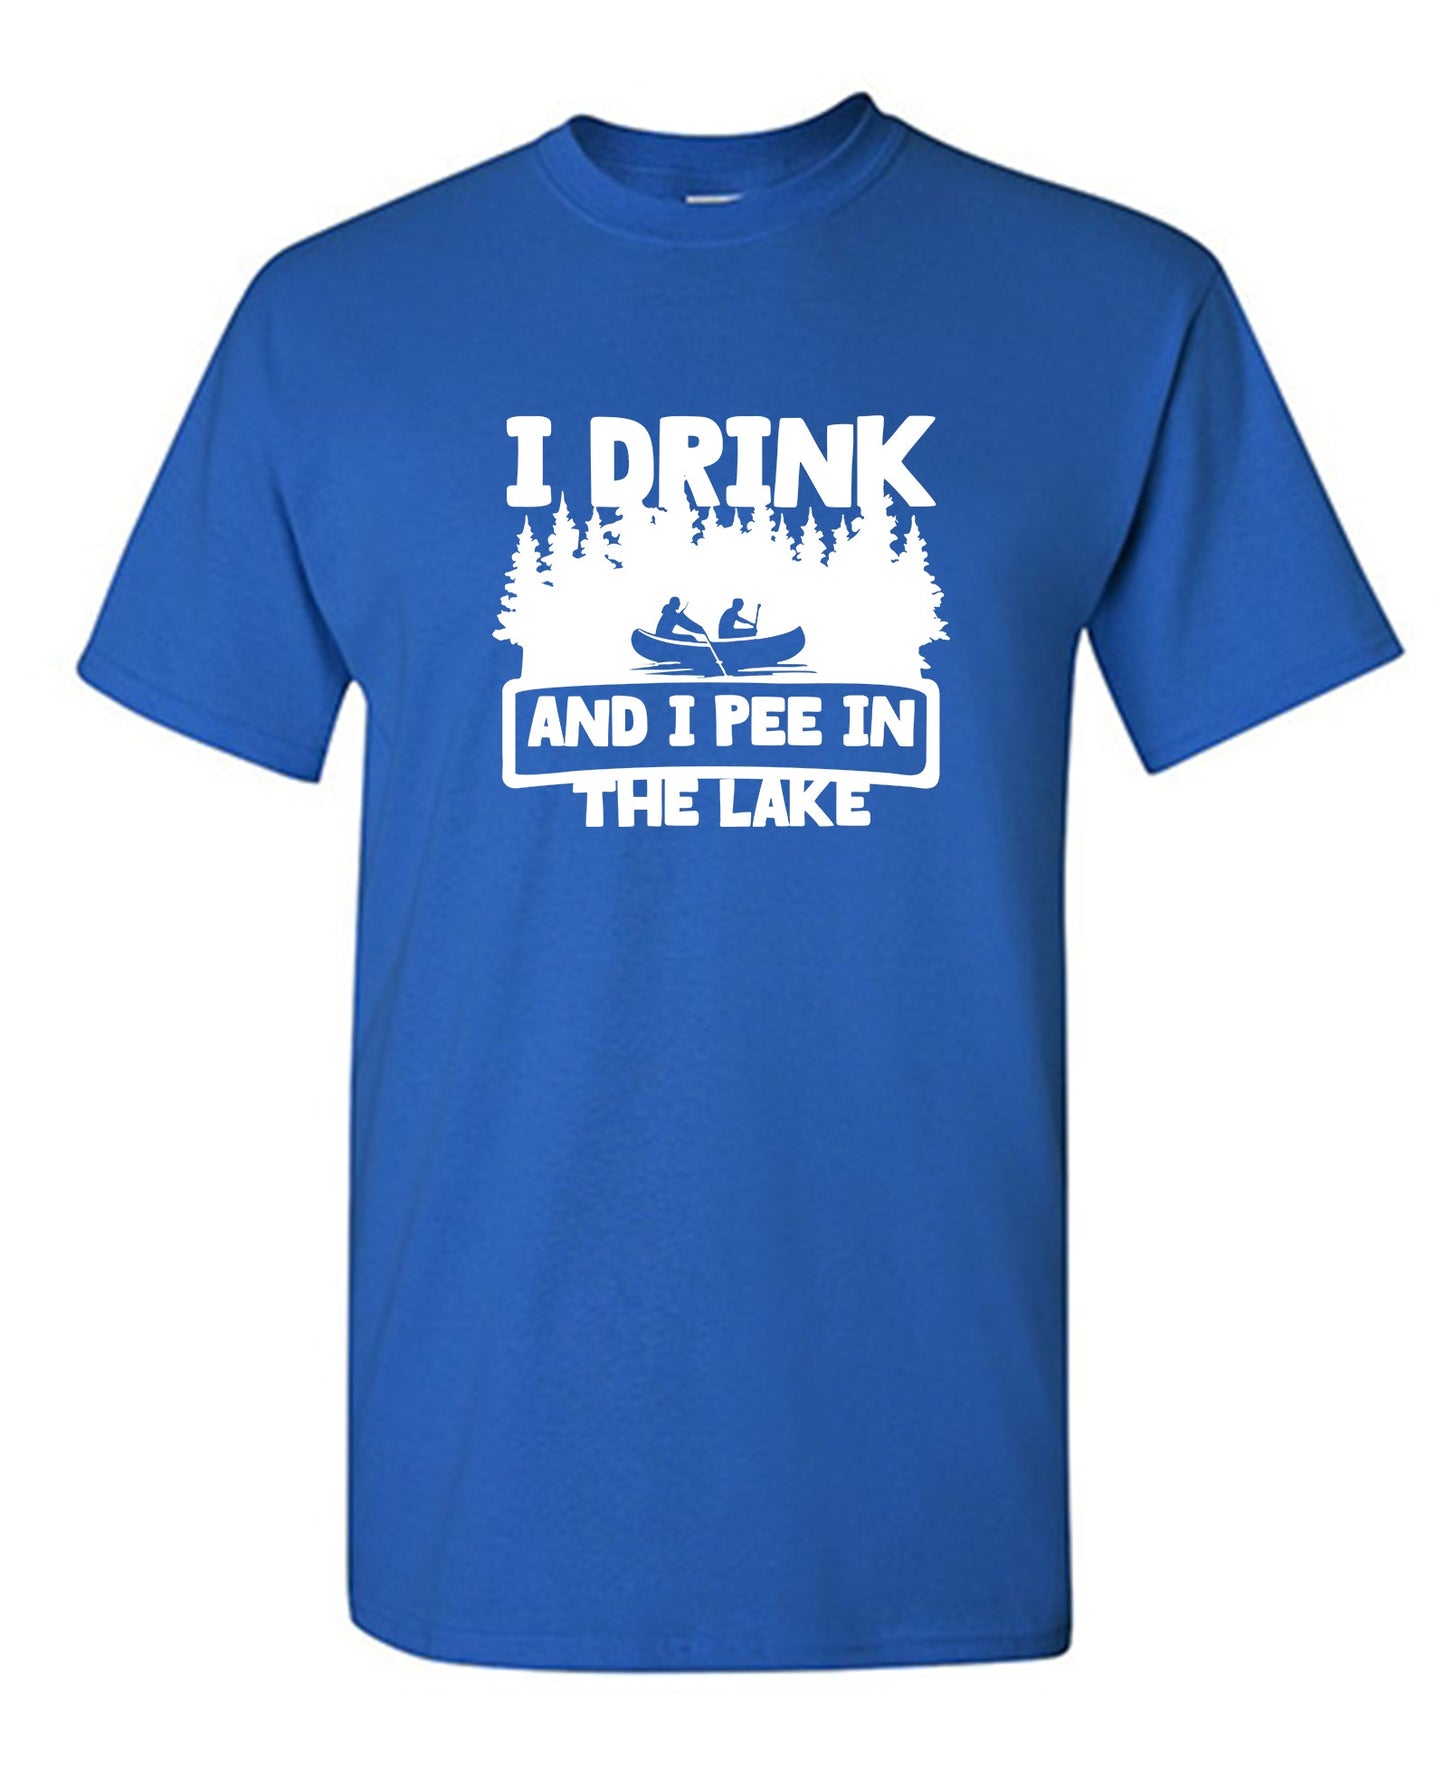 I Drink and I Pee in the Lake - Funny T Shirts & Graphic Tees